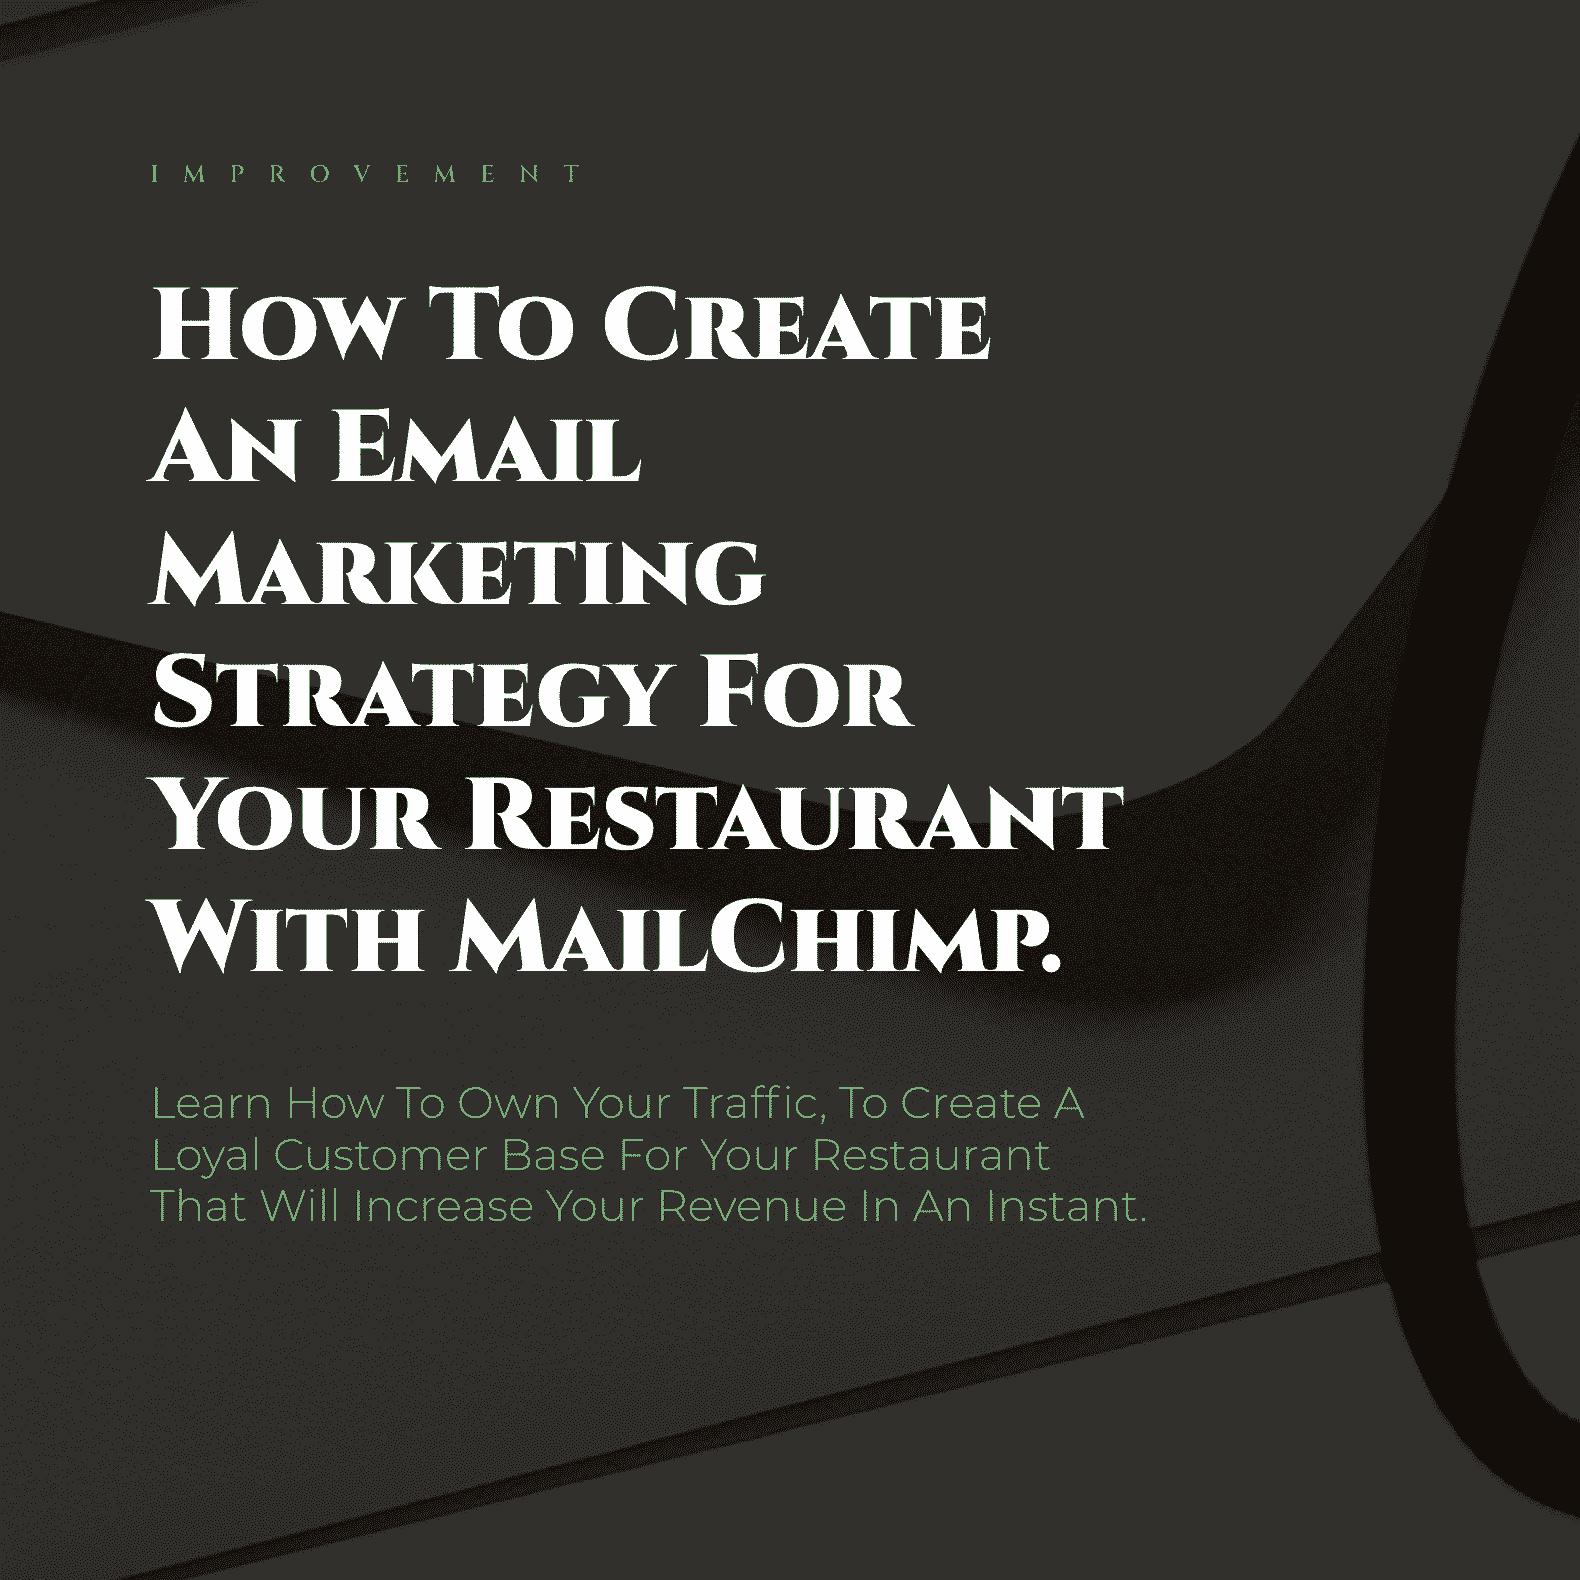 How to create an email marketing strategy for your restaurant with MailChimp.